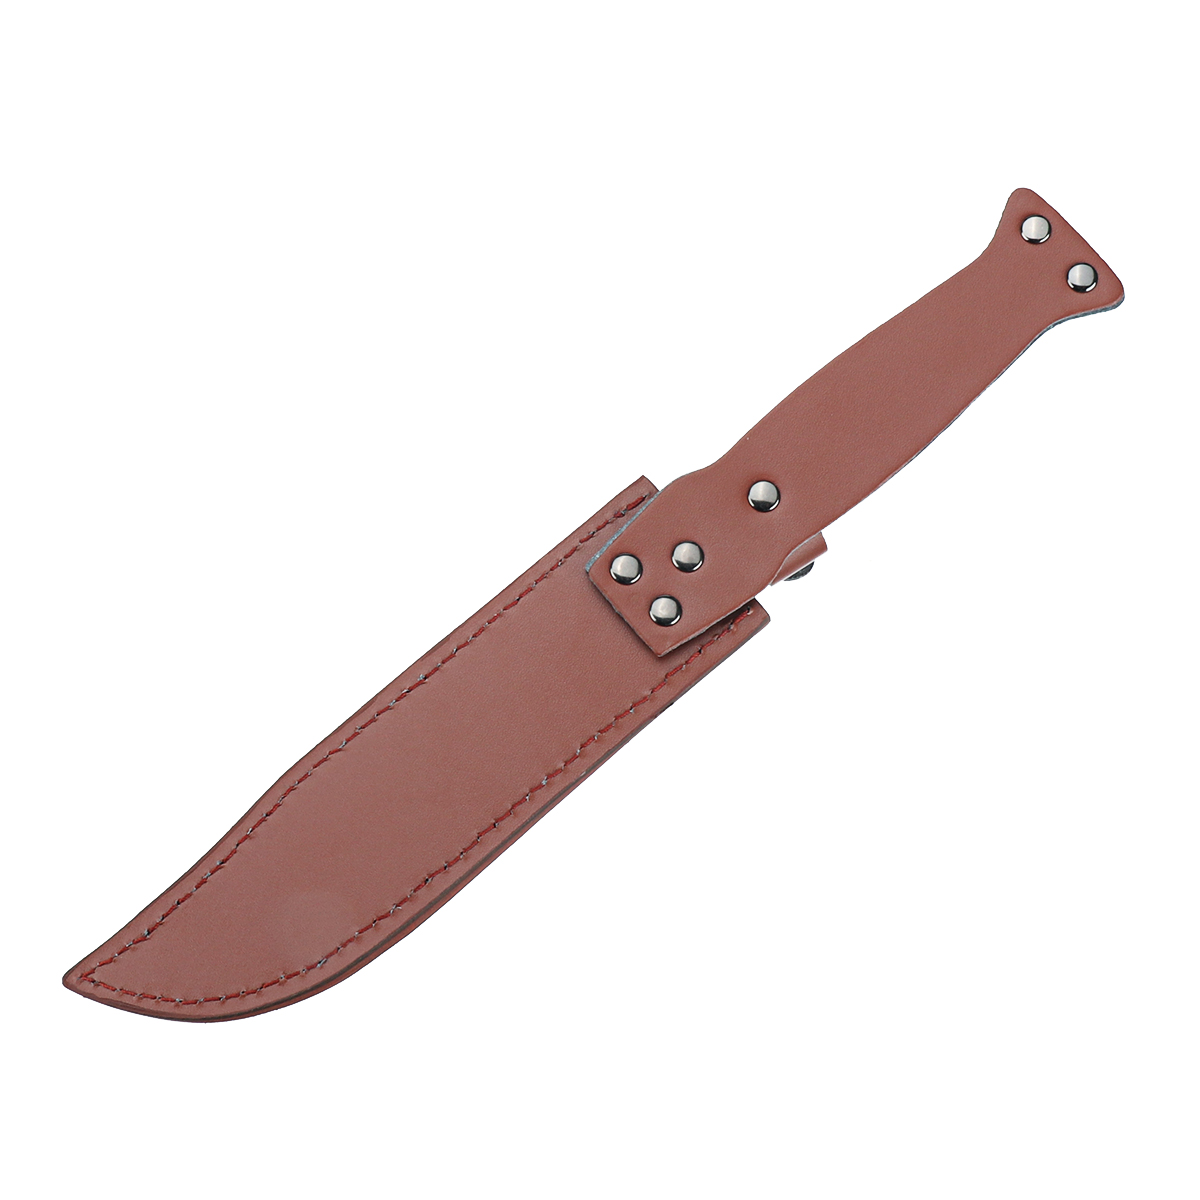 33cm-Leather-Sheath-Saber-Cutter-Holder-Cover-Protector-Cosplay-Costume-Outdoor-Leather-Craft-Tool-1626939-1